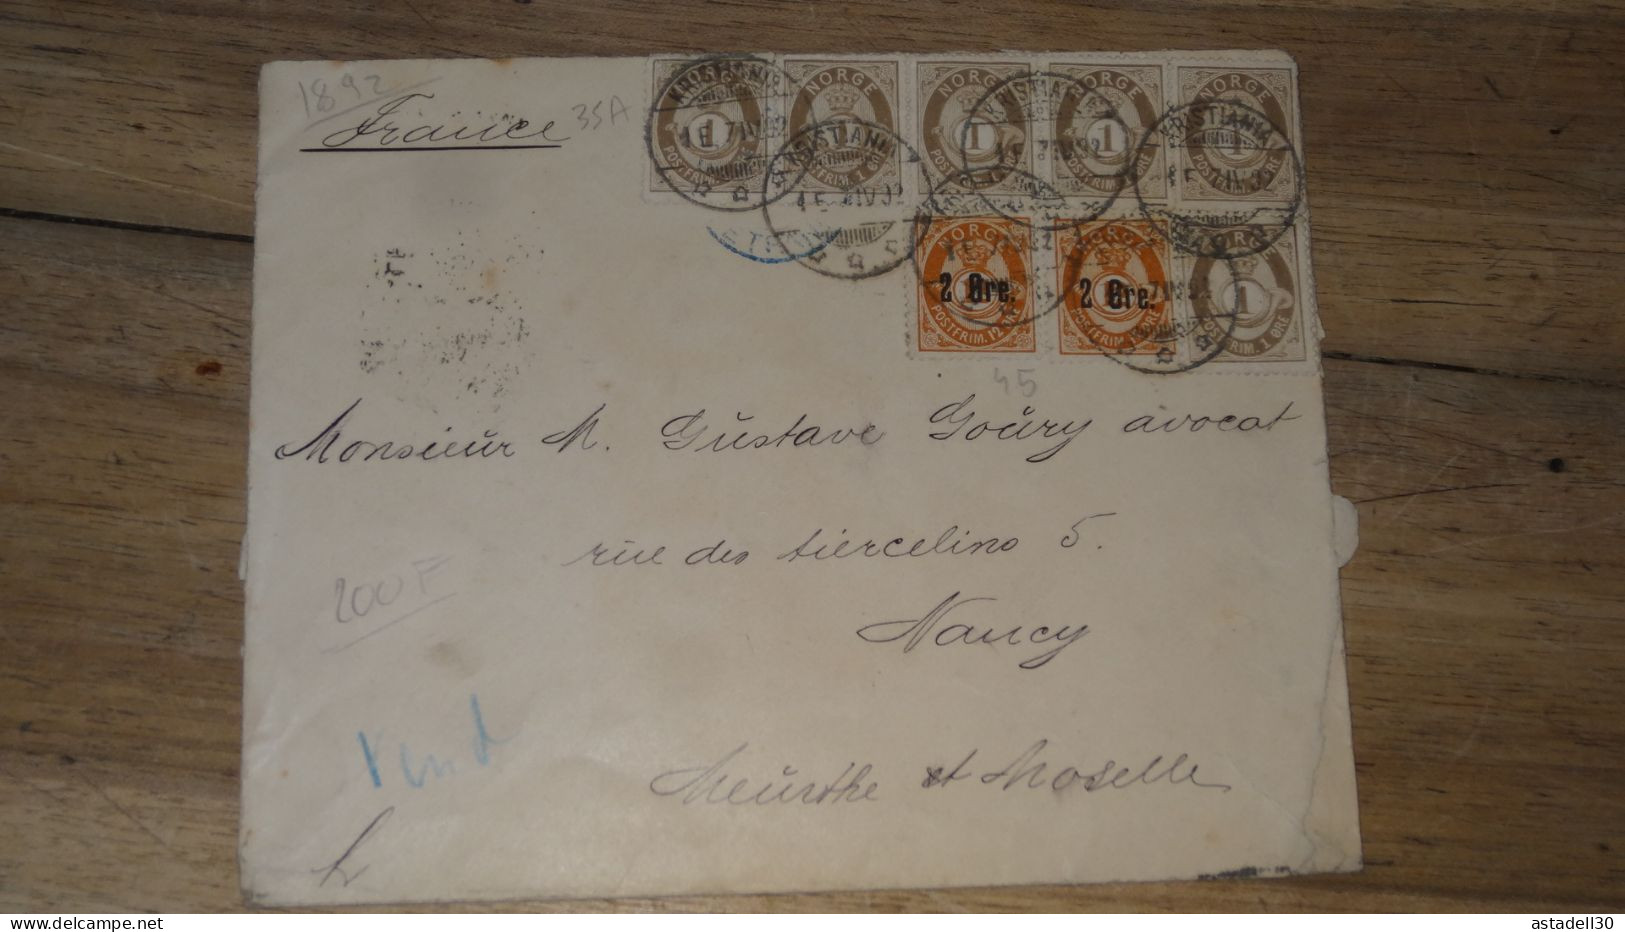 Enveloppe NORGE, Christiania 1892 ......... Boite1 ..... 240424-209 - Covers & Documents